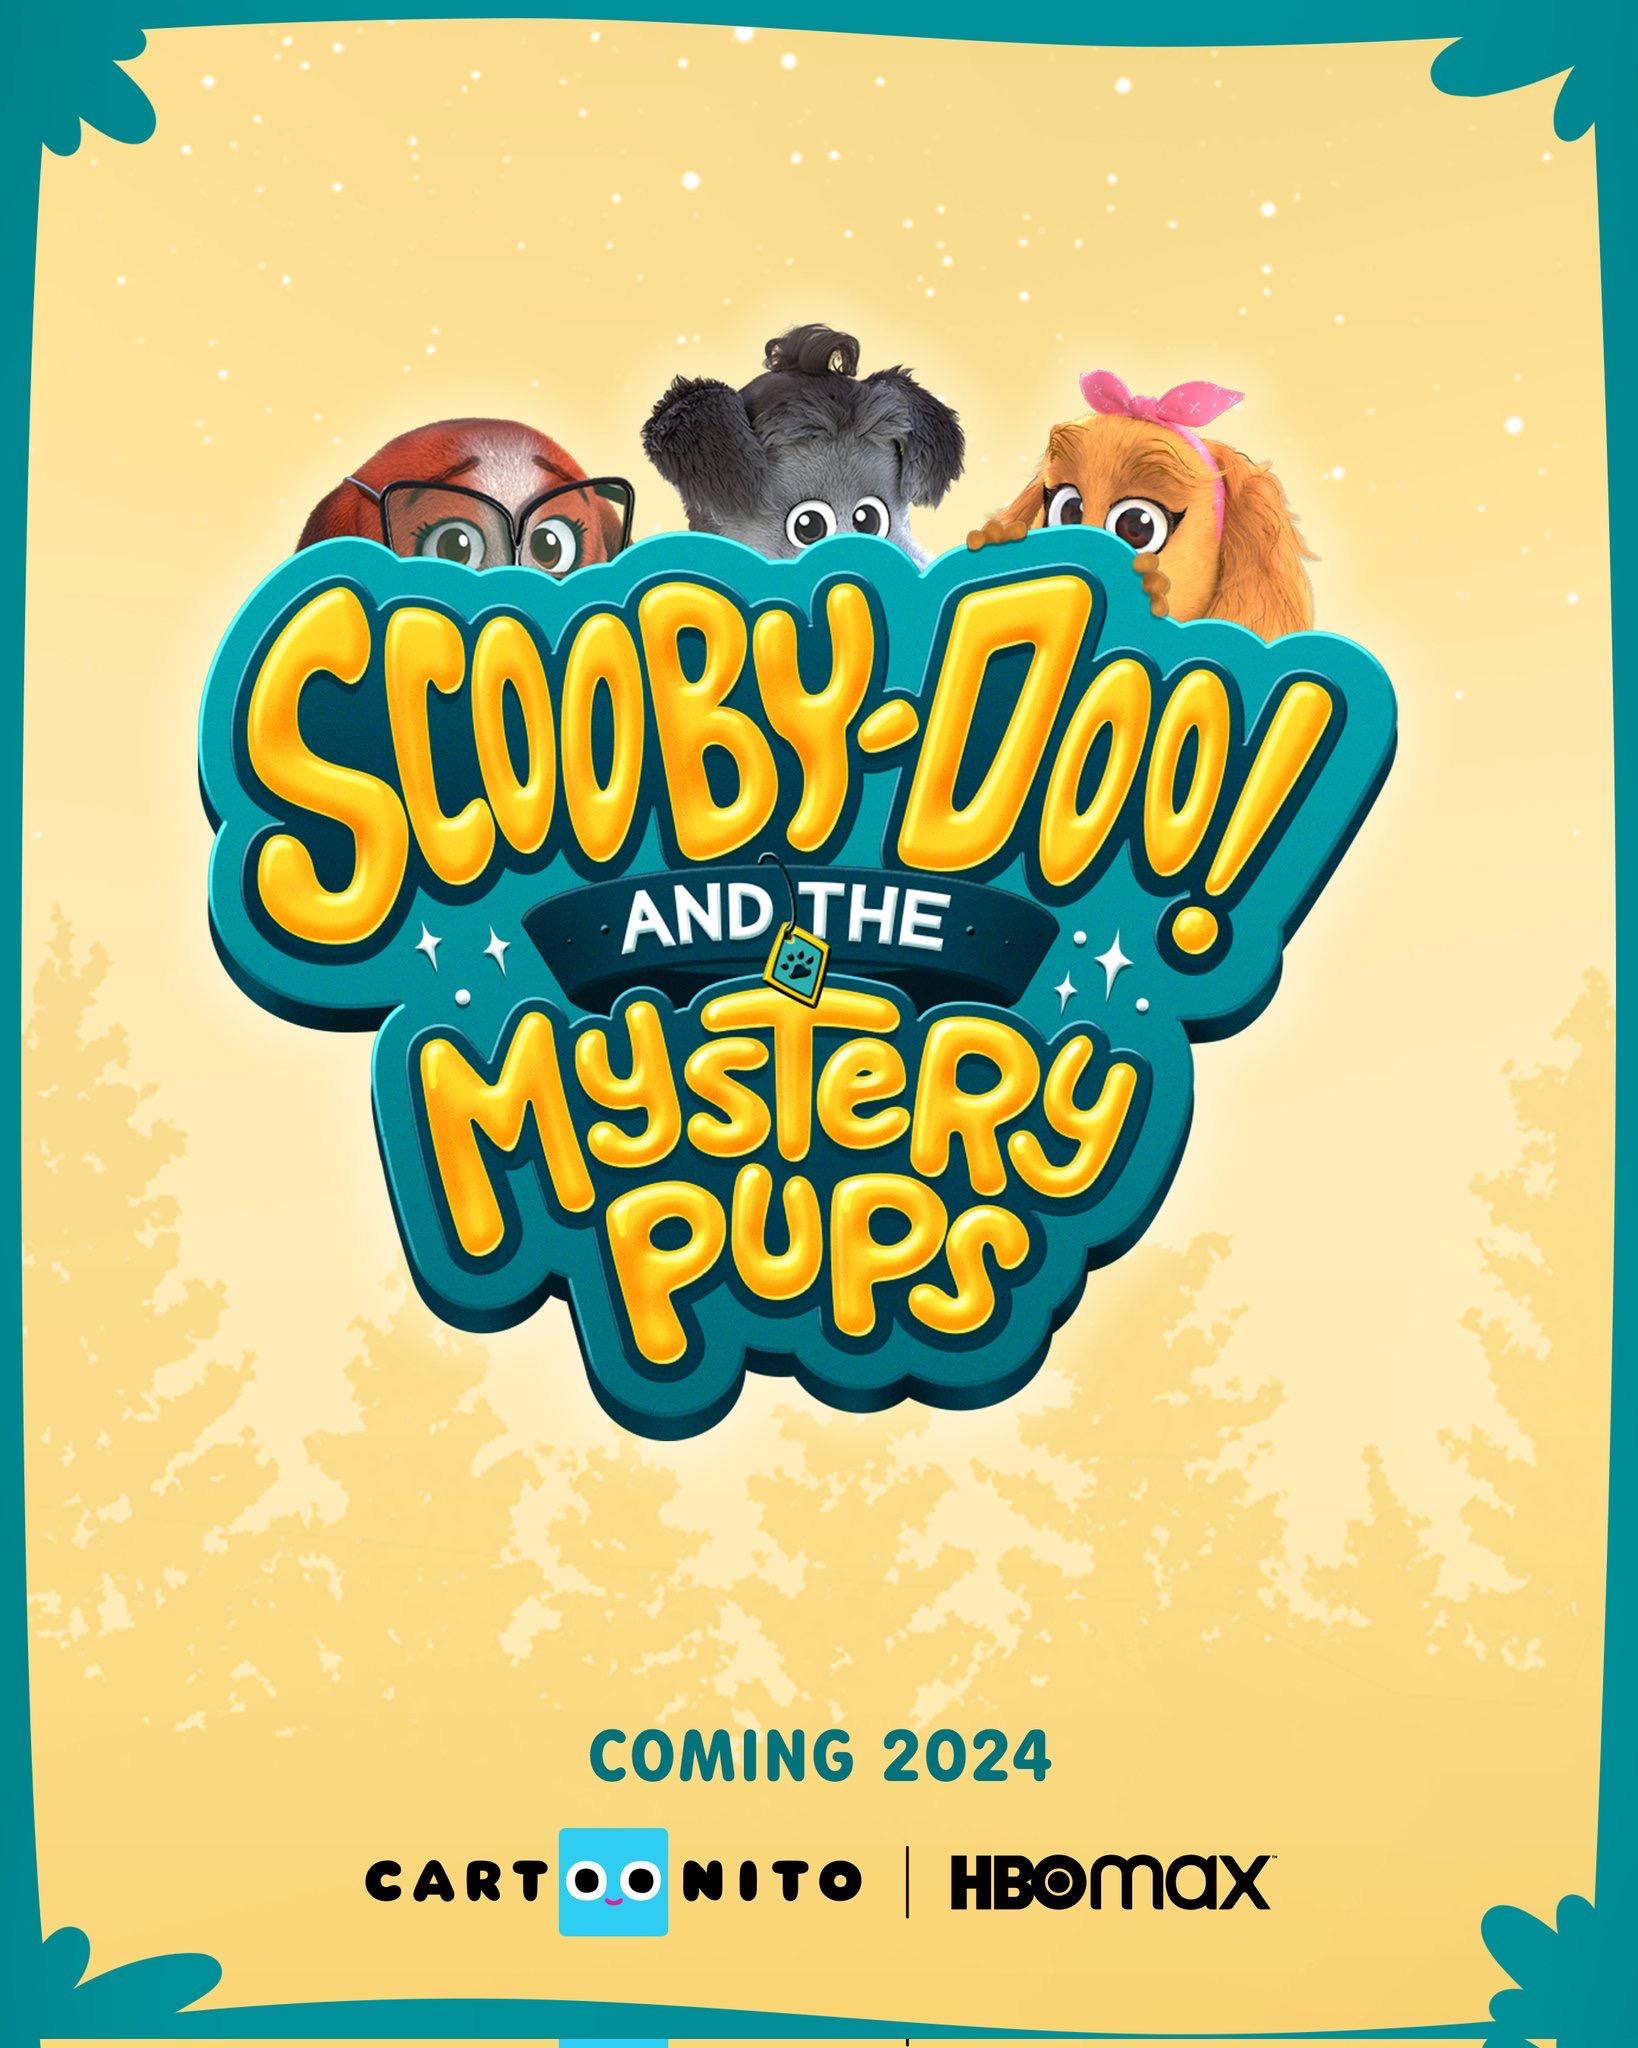 scooby-doo-and-the-mystery-pups-hbo-max-cartoon-network.jpg